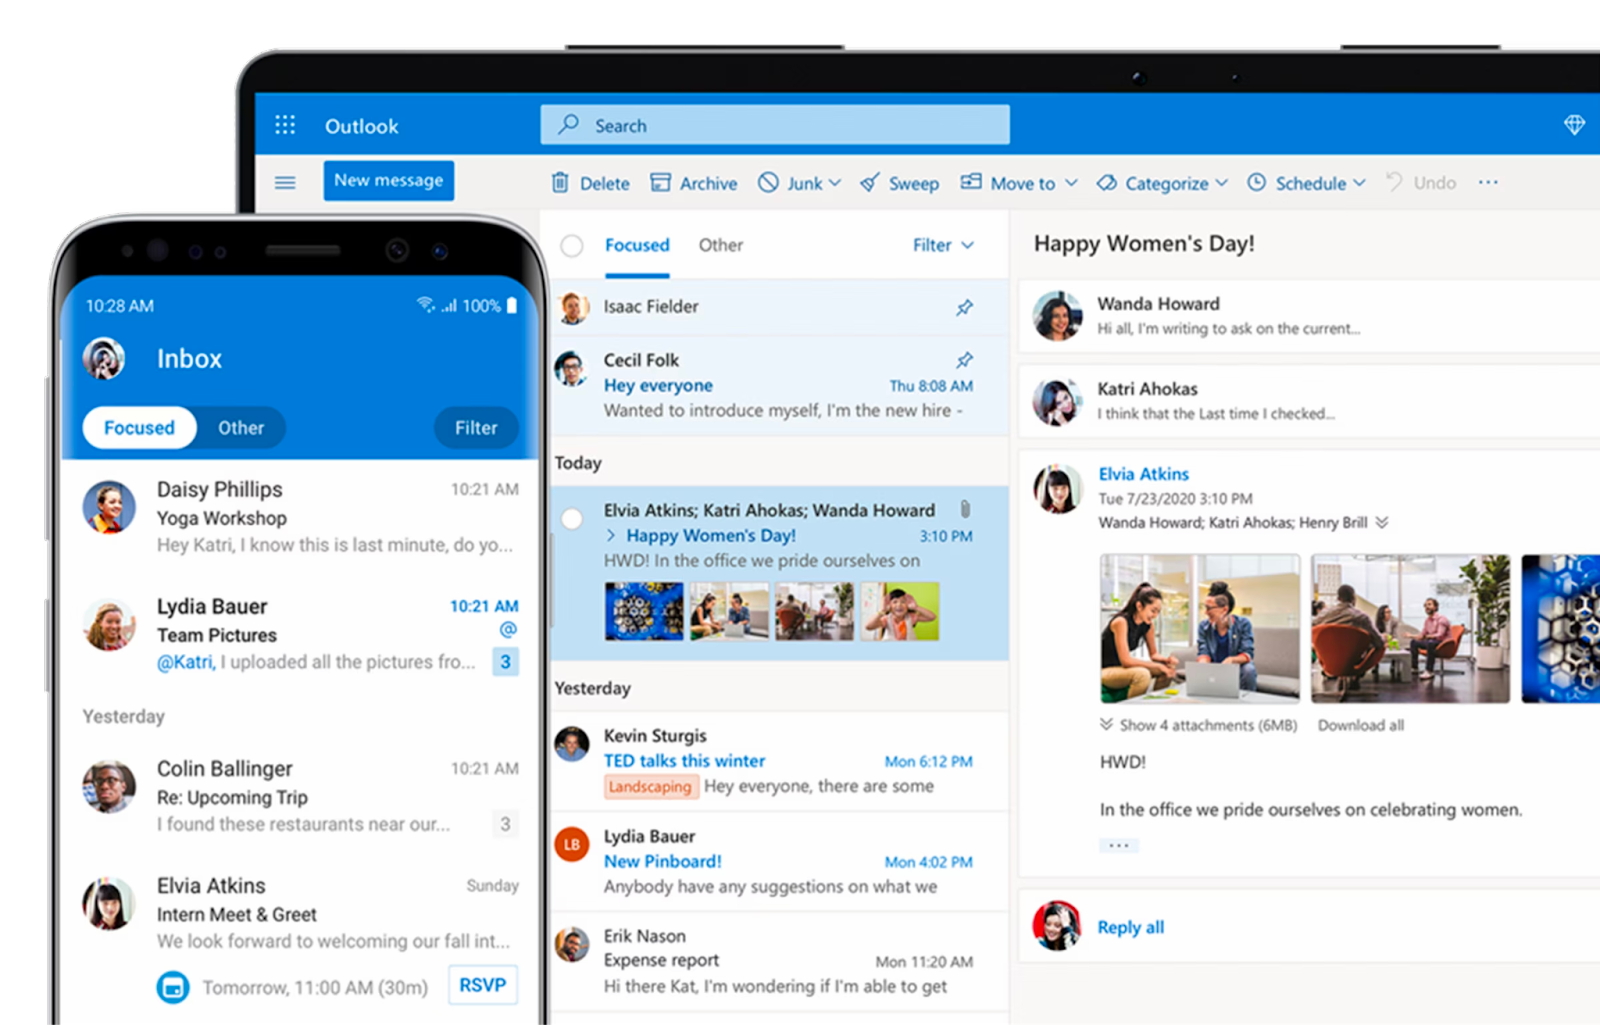 Outlook for Mobile and Desktop